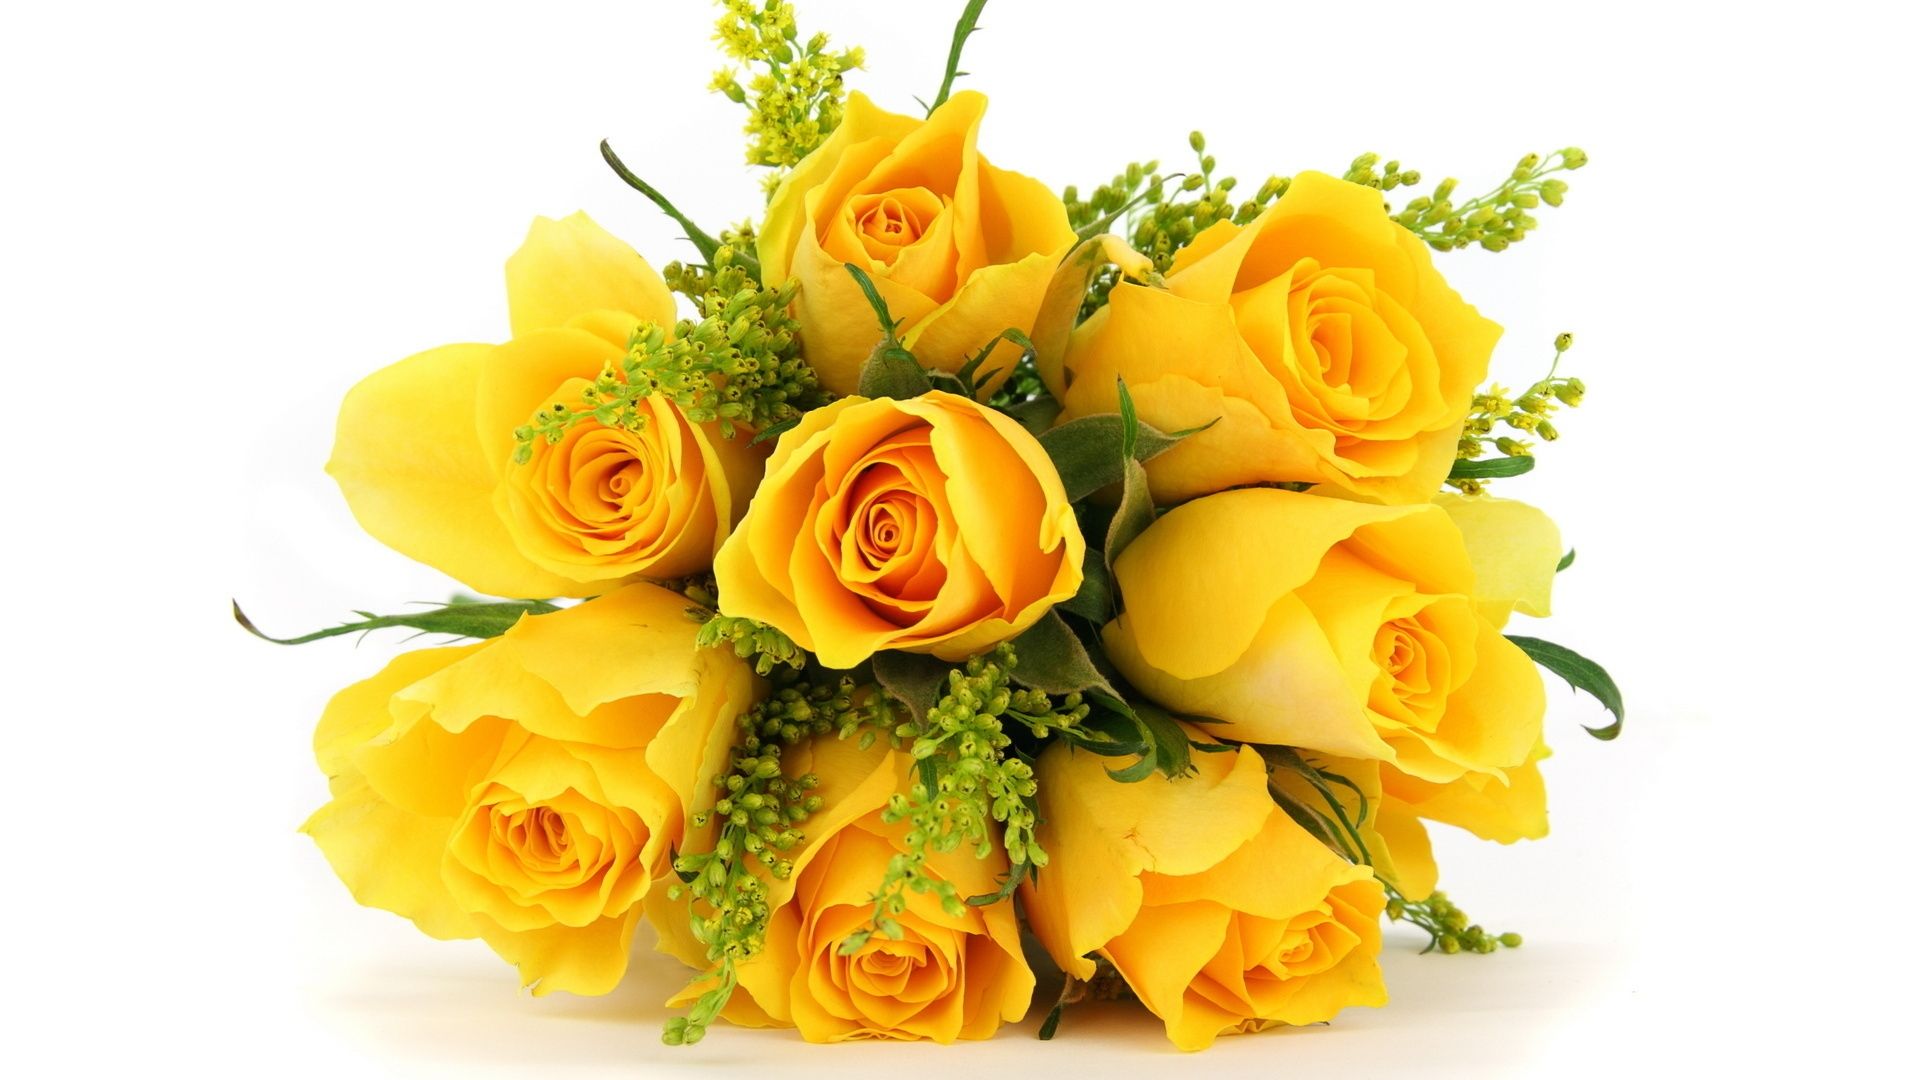 Download Wallpaper 1920x1080 Roses, Flowers, Flower, Yellow, Buds ...